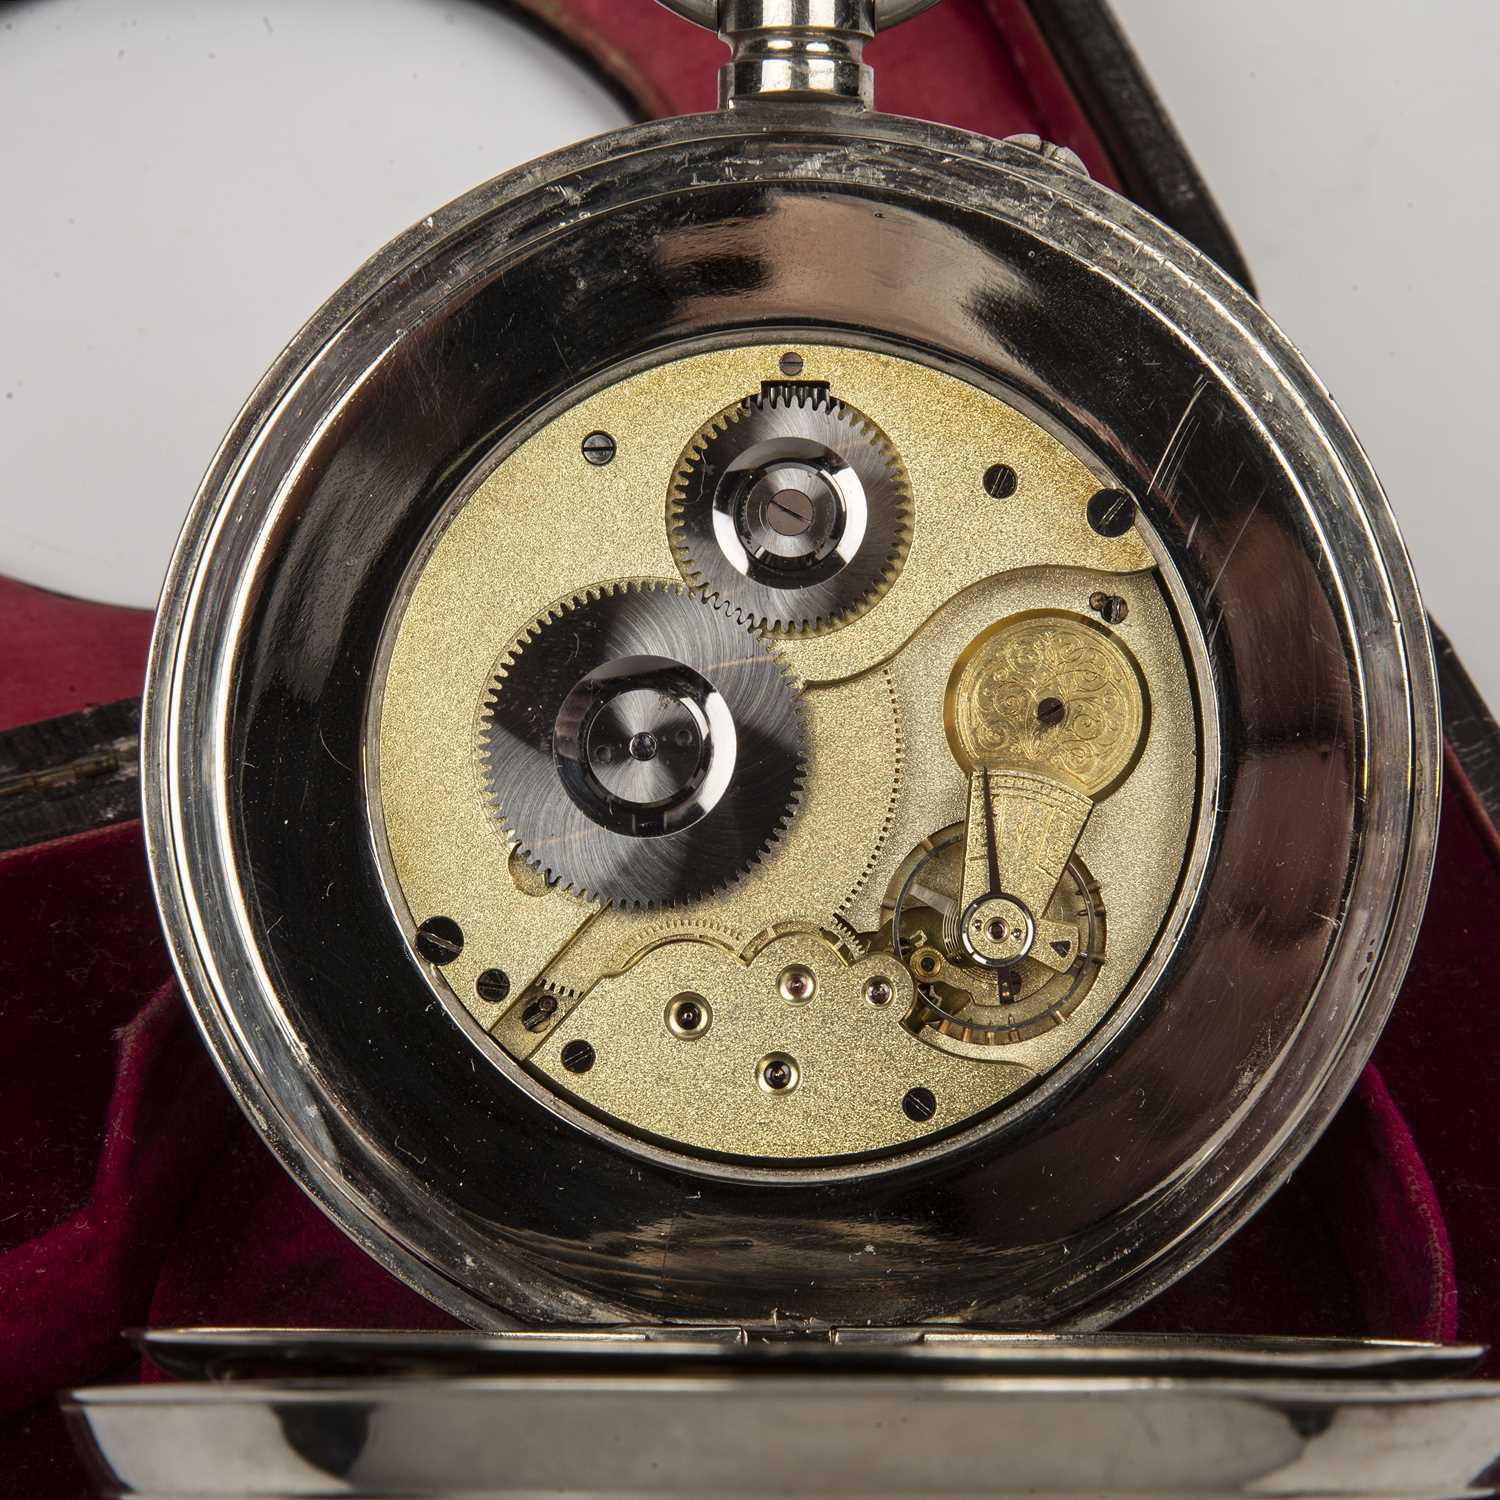 A Goliath pocket watch with a silver plated case and enamelled dial with roman numerals and a - Image 5 of 7